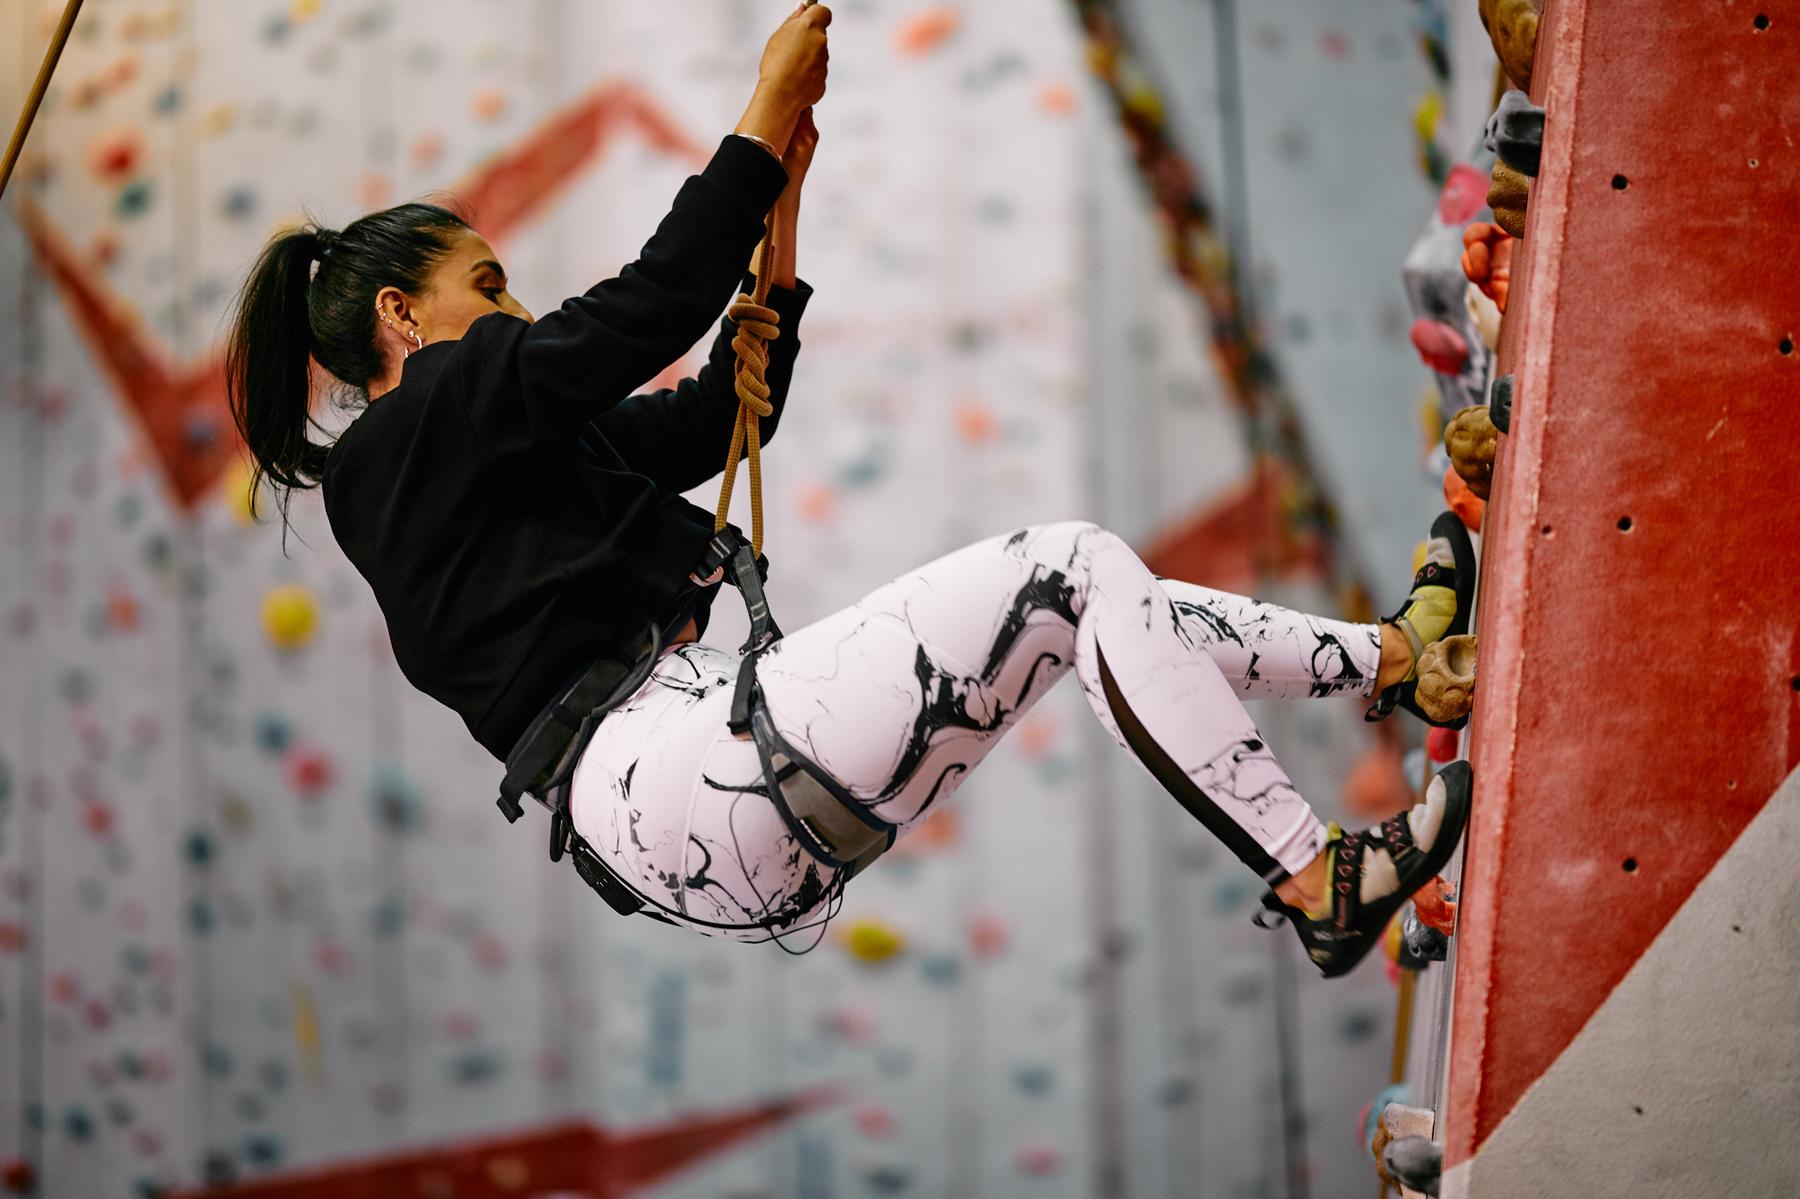 Get To Grips With Kiran’s #MyChallenge | Climbing Feed